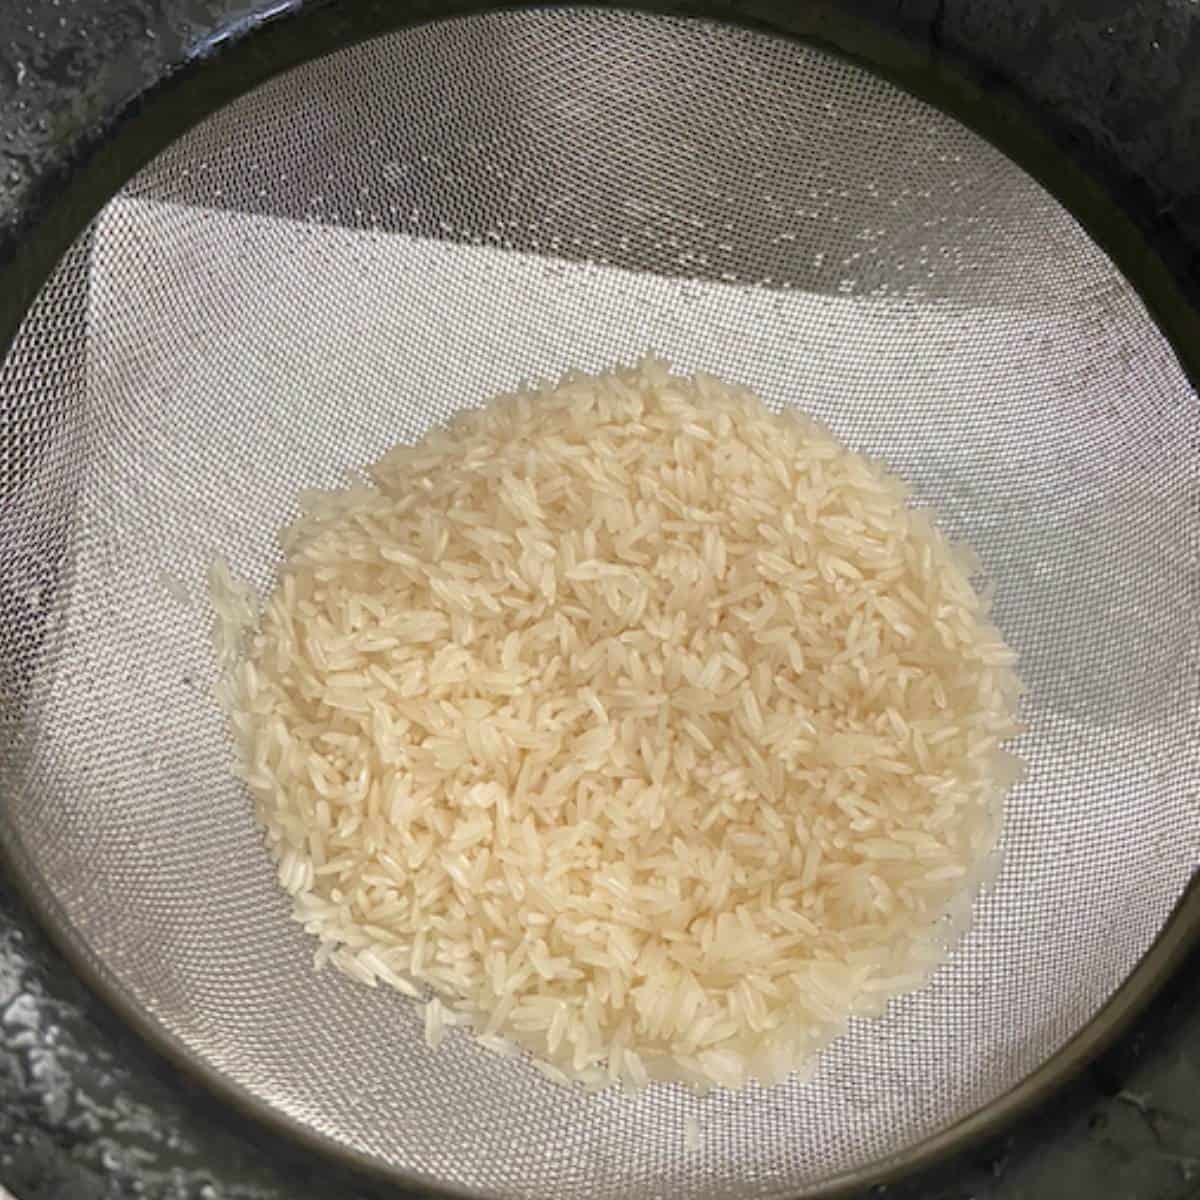 Rice after rinsed in colander.